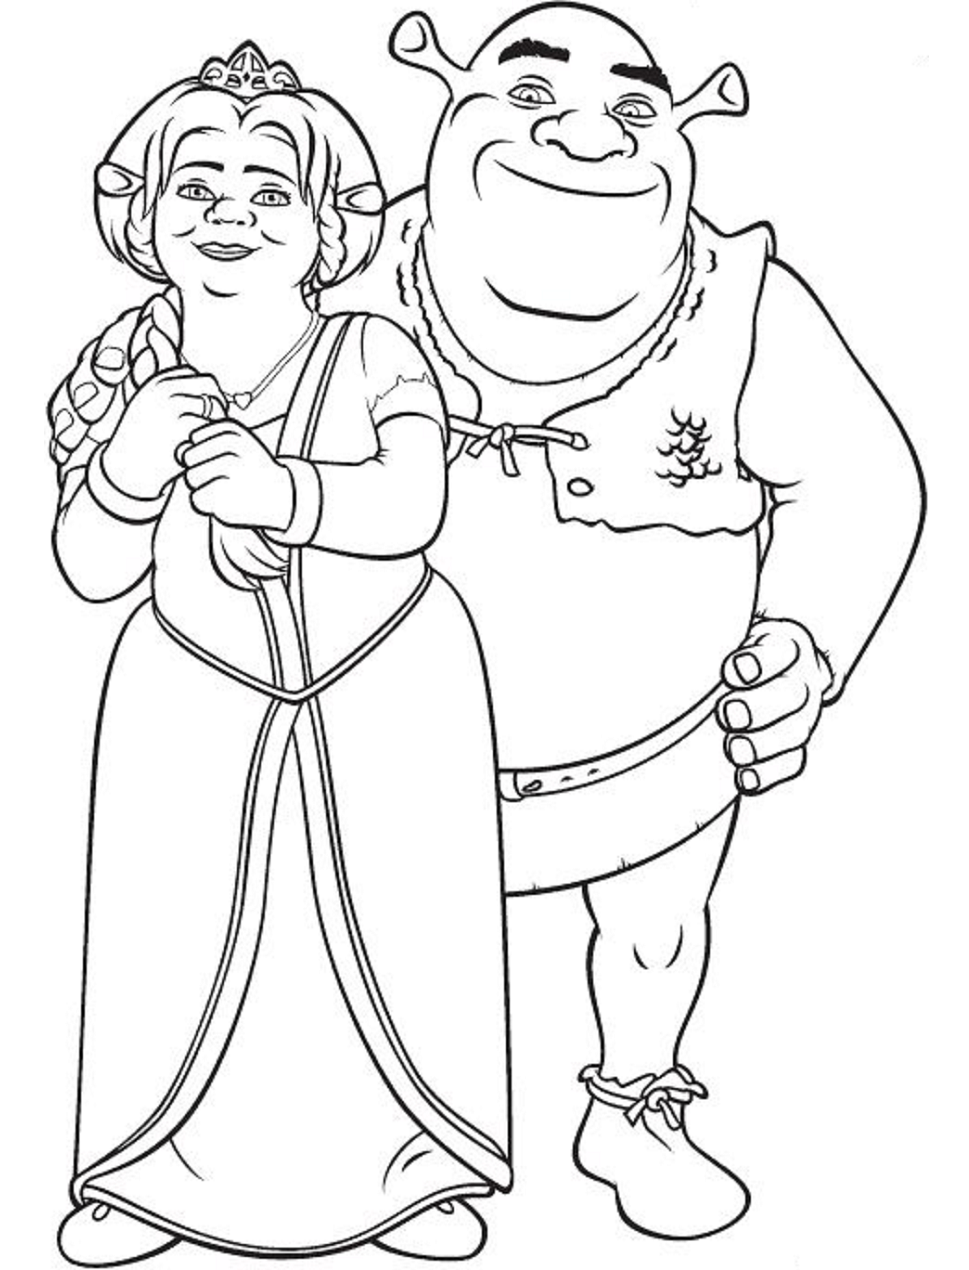 Shrek Coloring Pages Free Printable Coloring Pages for Kids